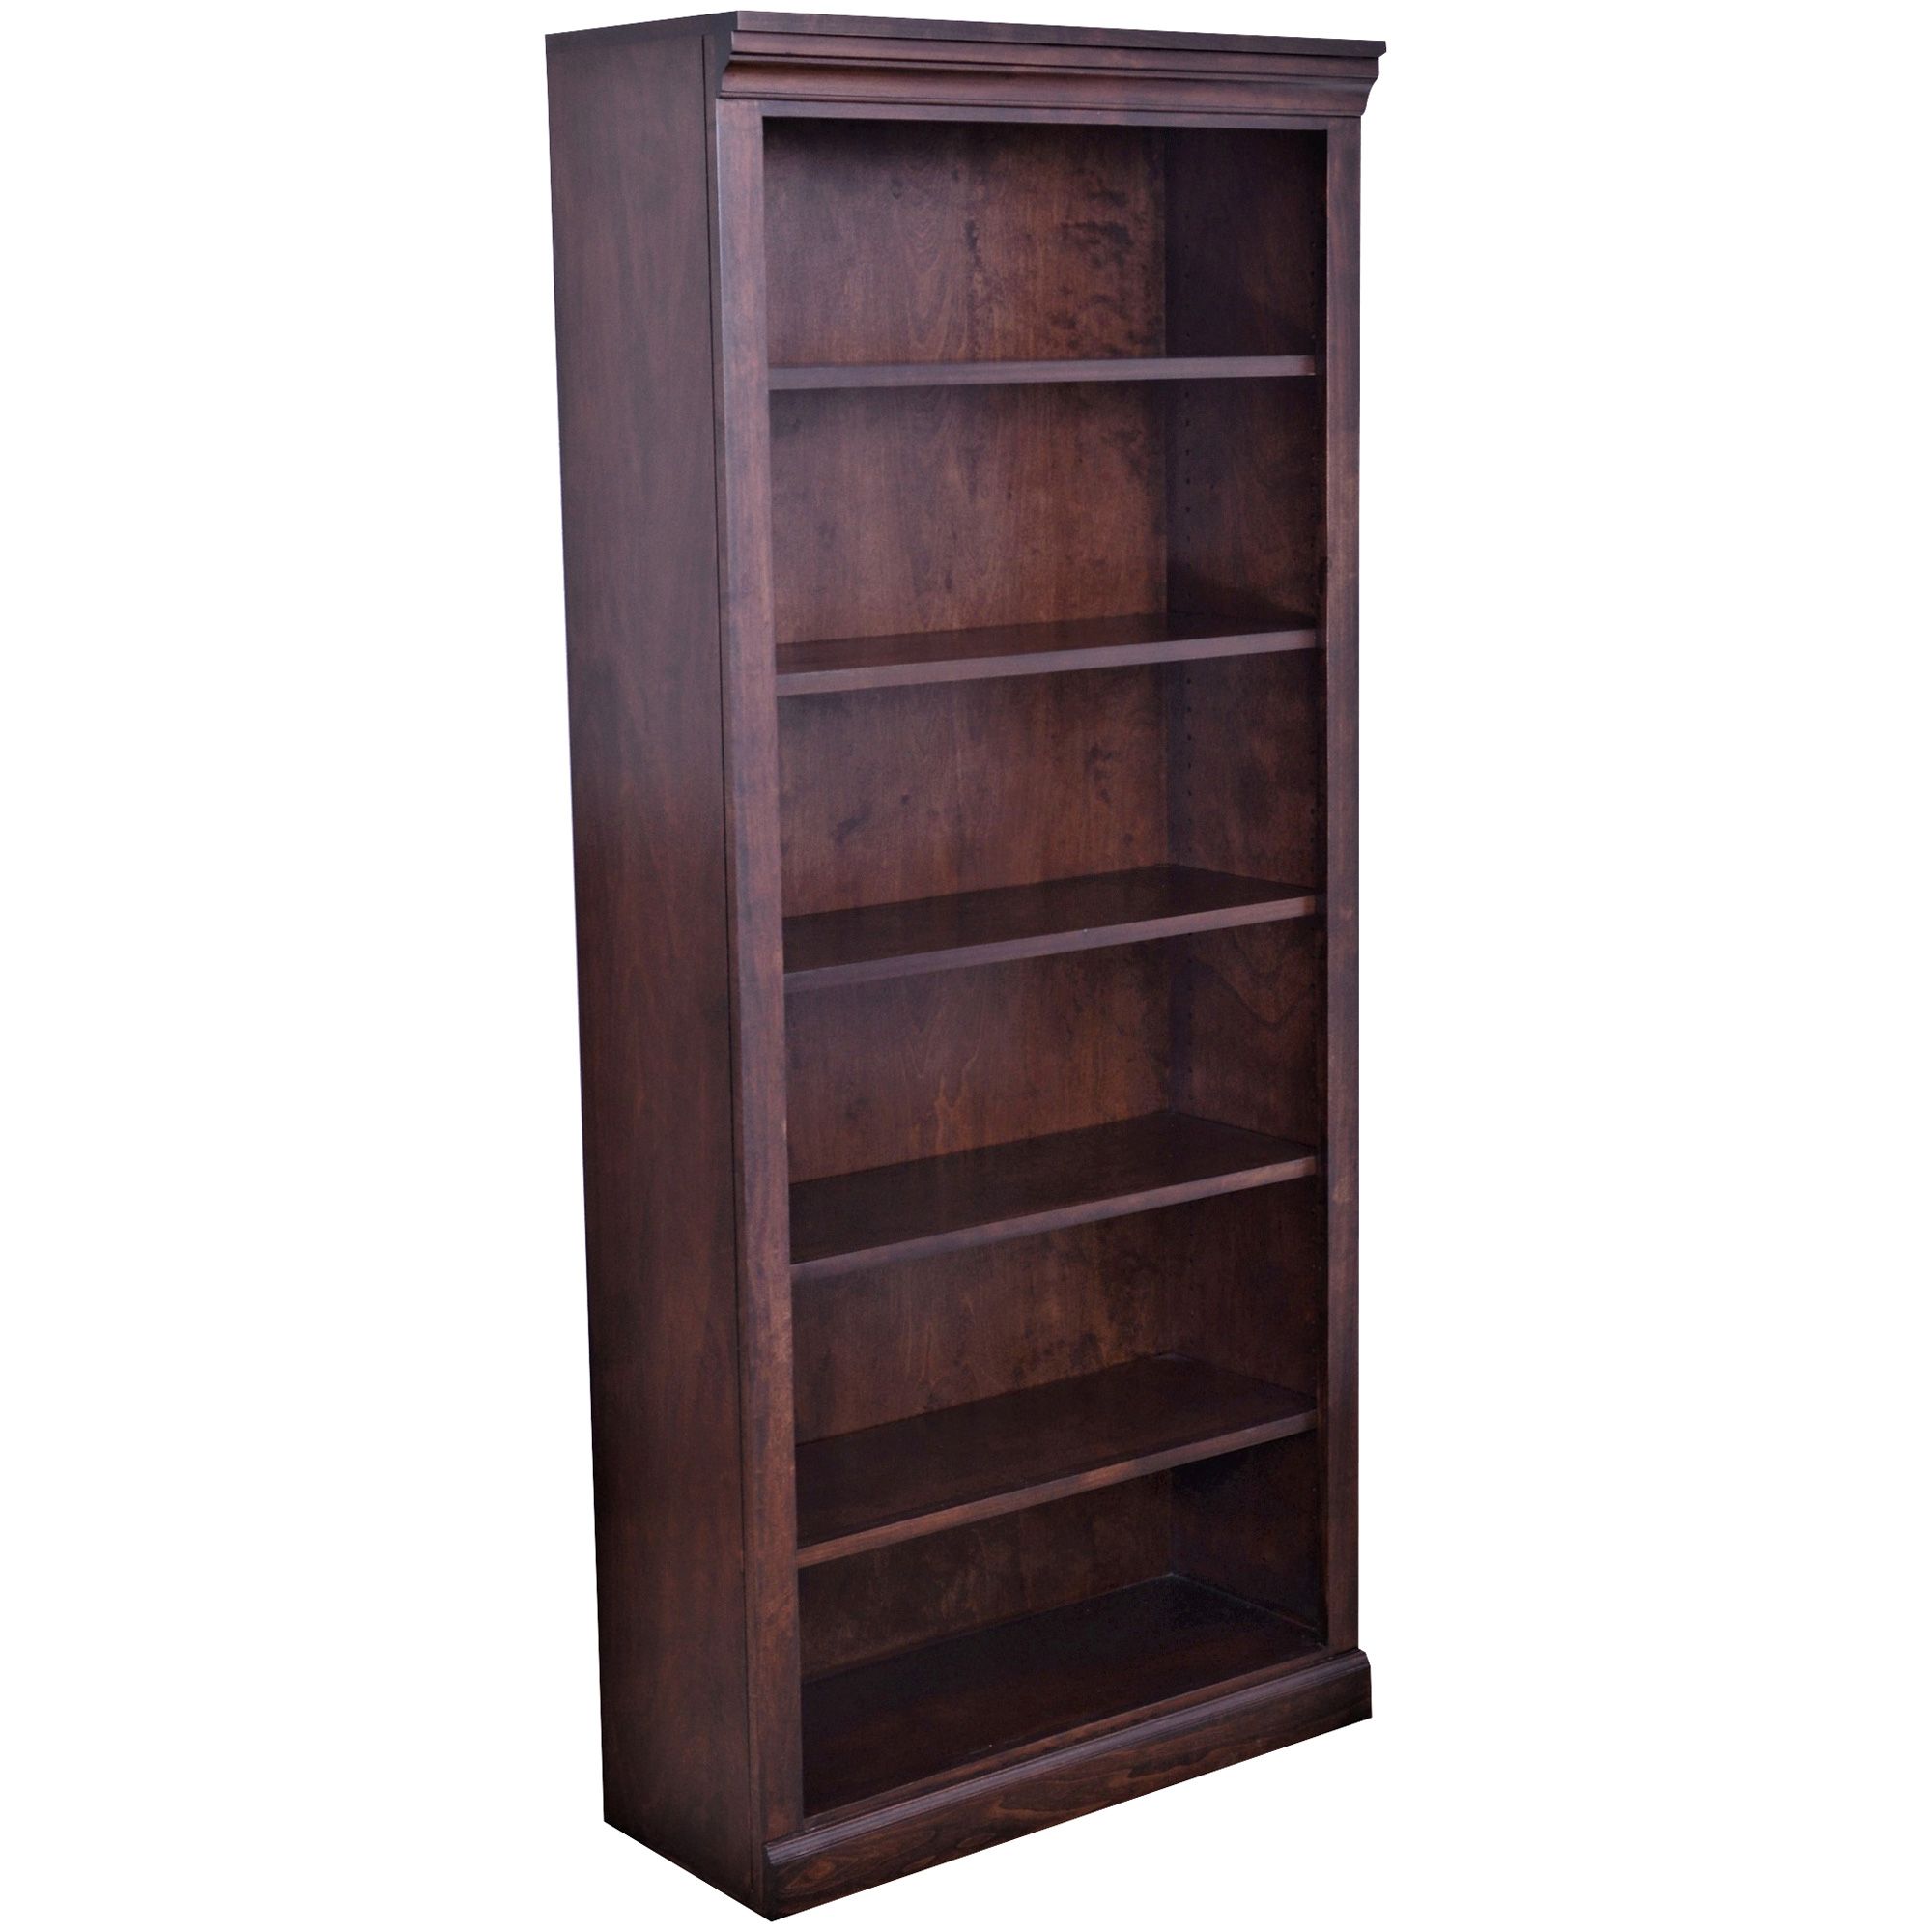 Classic 72 Inch Bookcase | Home Decor | Slumberland Intended For 72 Inch Bookcases (View 2 of 15)